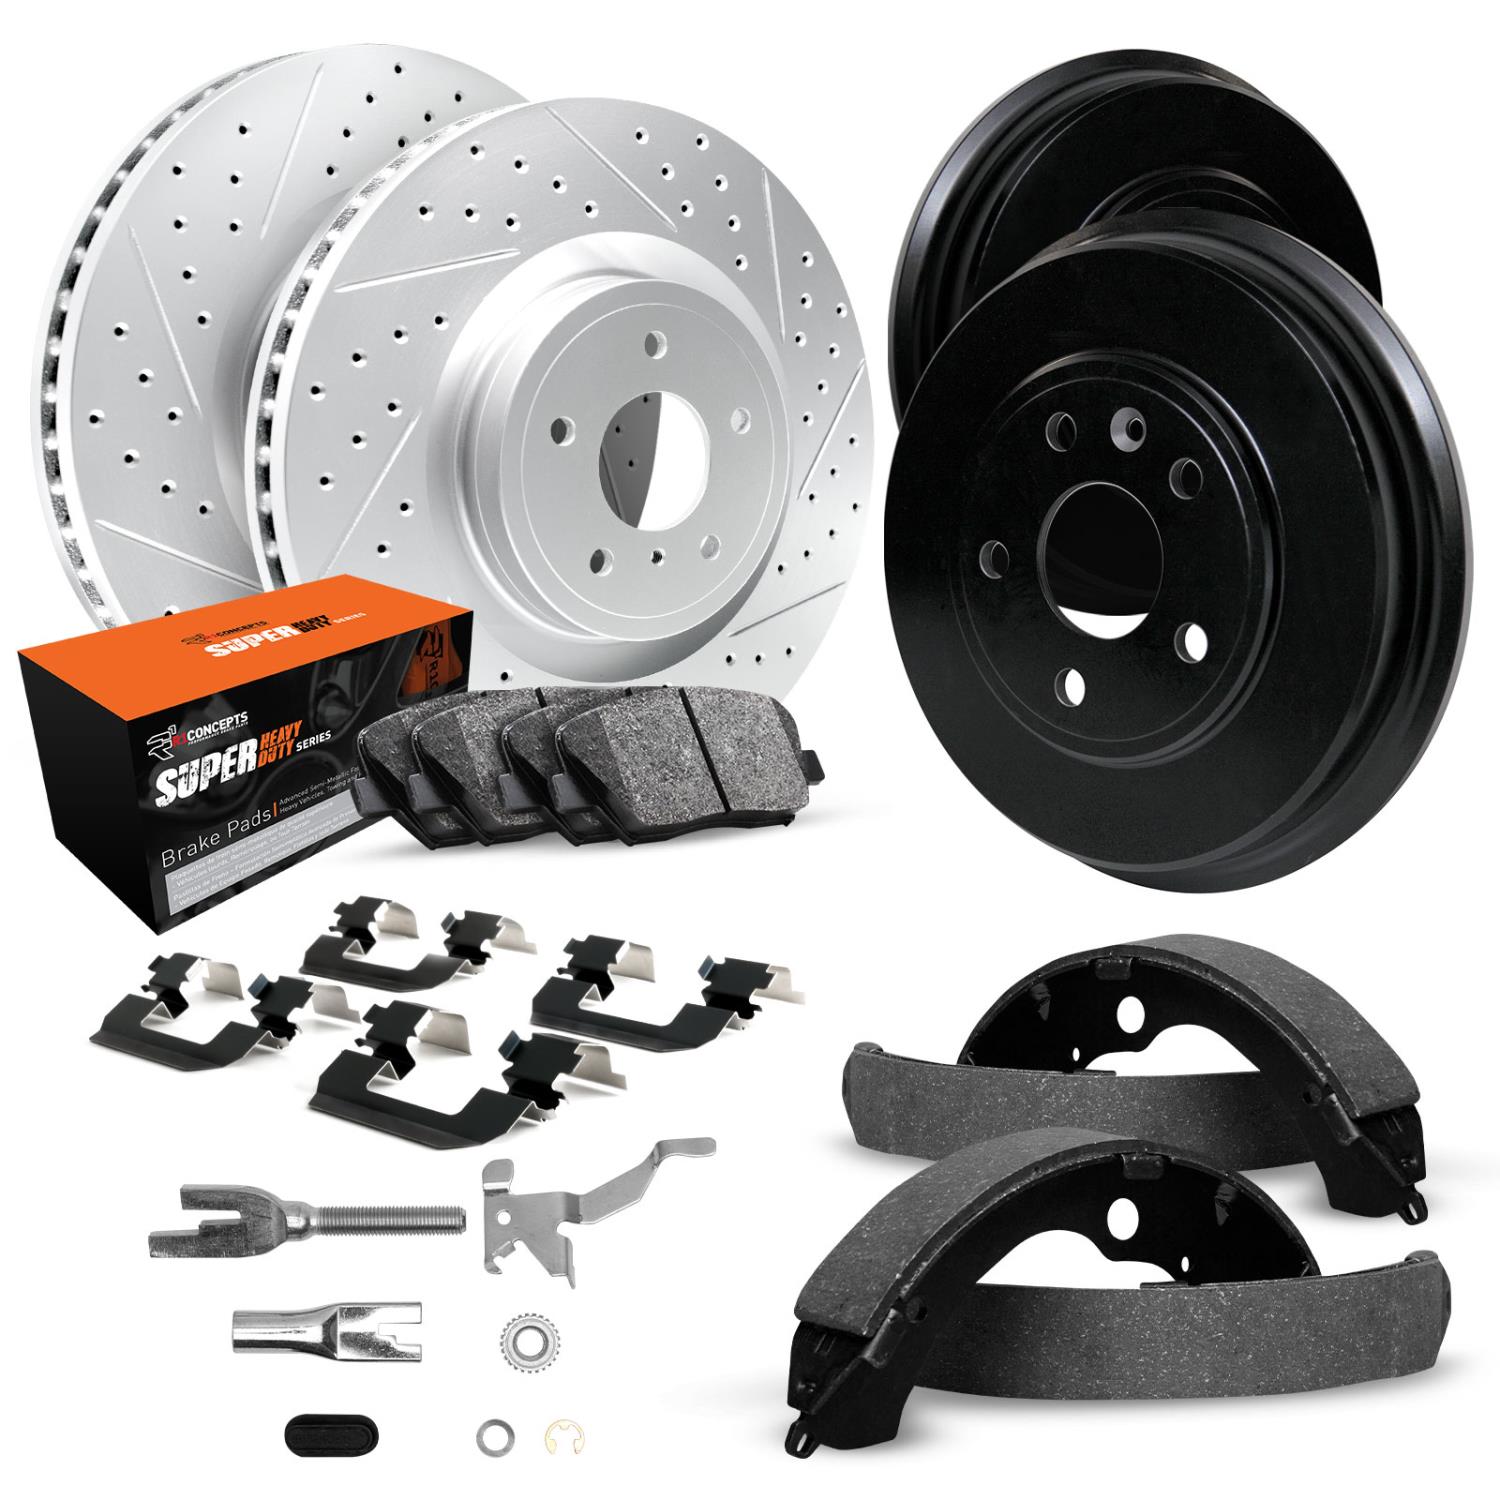 GEO-Carbon Drilled/Slotted Rotors/Drums w/Super-Duty Pads/Shoes/Hardware/Adjusters, 2002-2007 GM, Position: Front/Rear